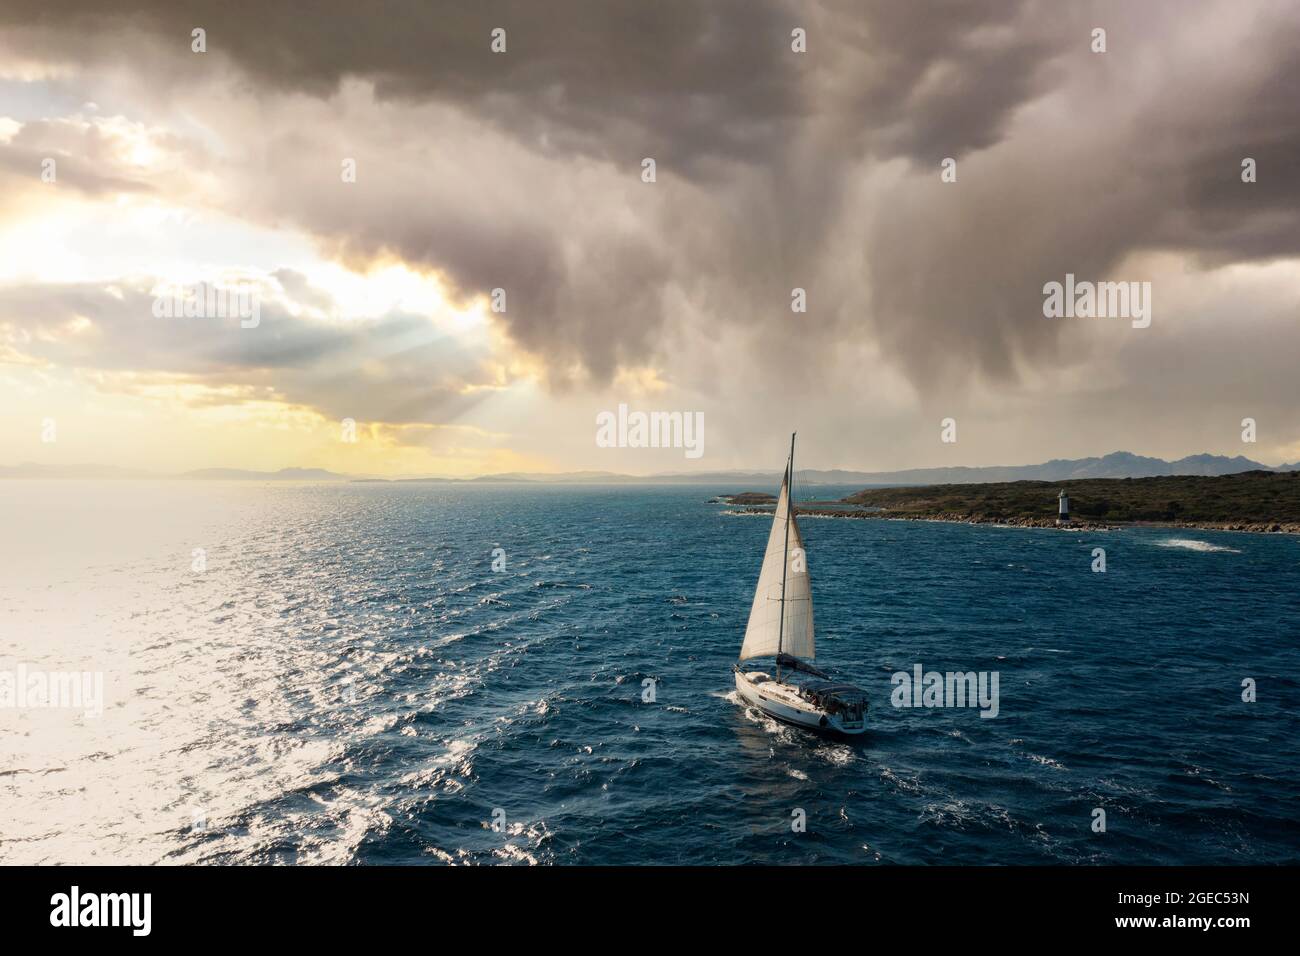 View from above, stunning aerial view of a sailboat sailing on a blue water during a beautiful and dramatic sunset. Costa Smeralda, Sardinia, Italy. Stock Photo